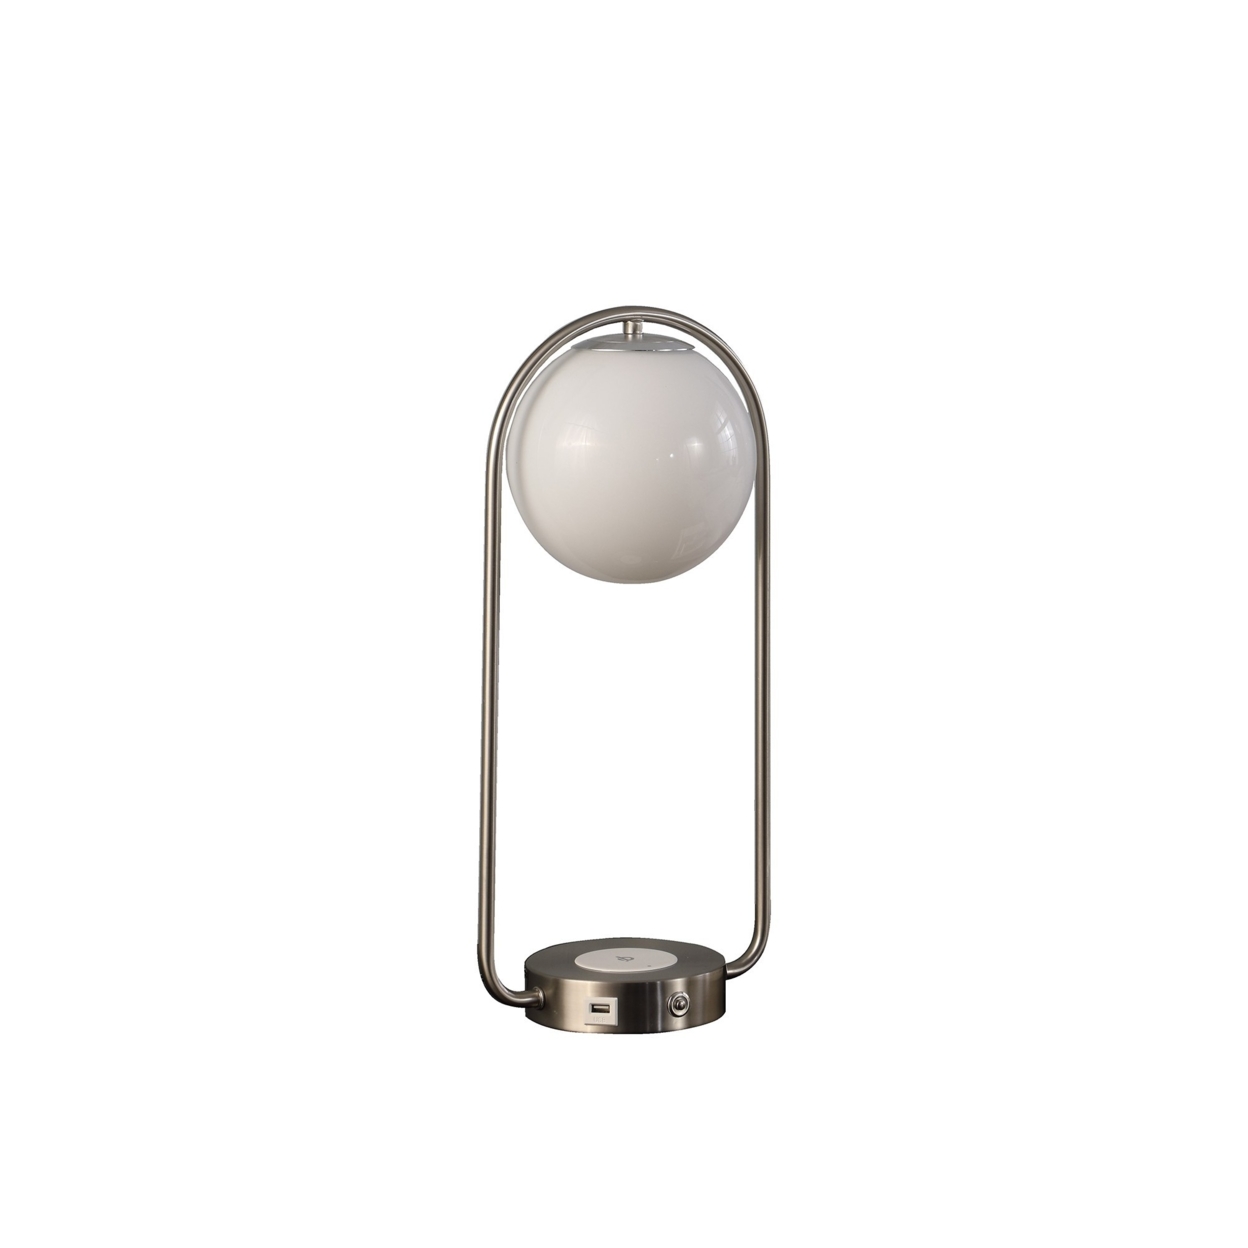 Table Lamp With Curved Open Frame And Hanging Globe Shade, Silver- Saltoro Sherpi